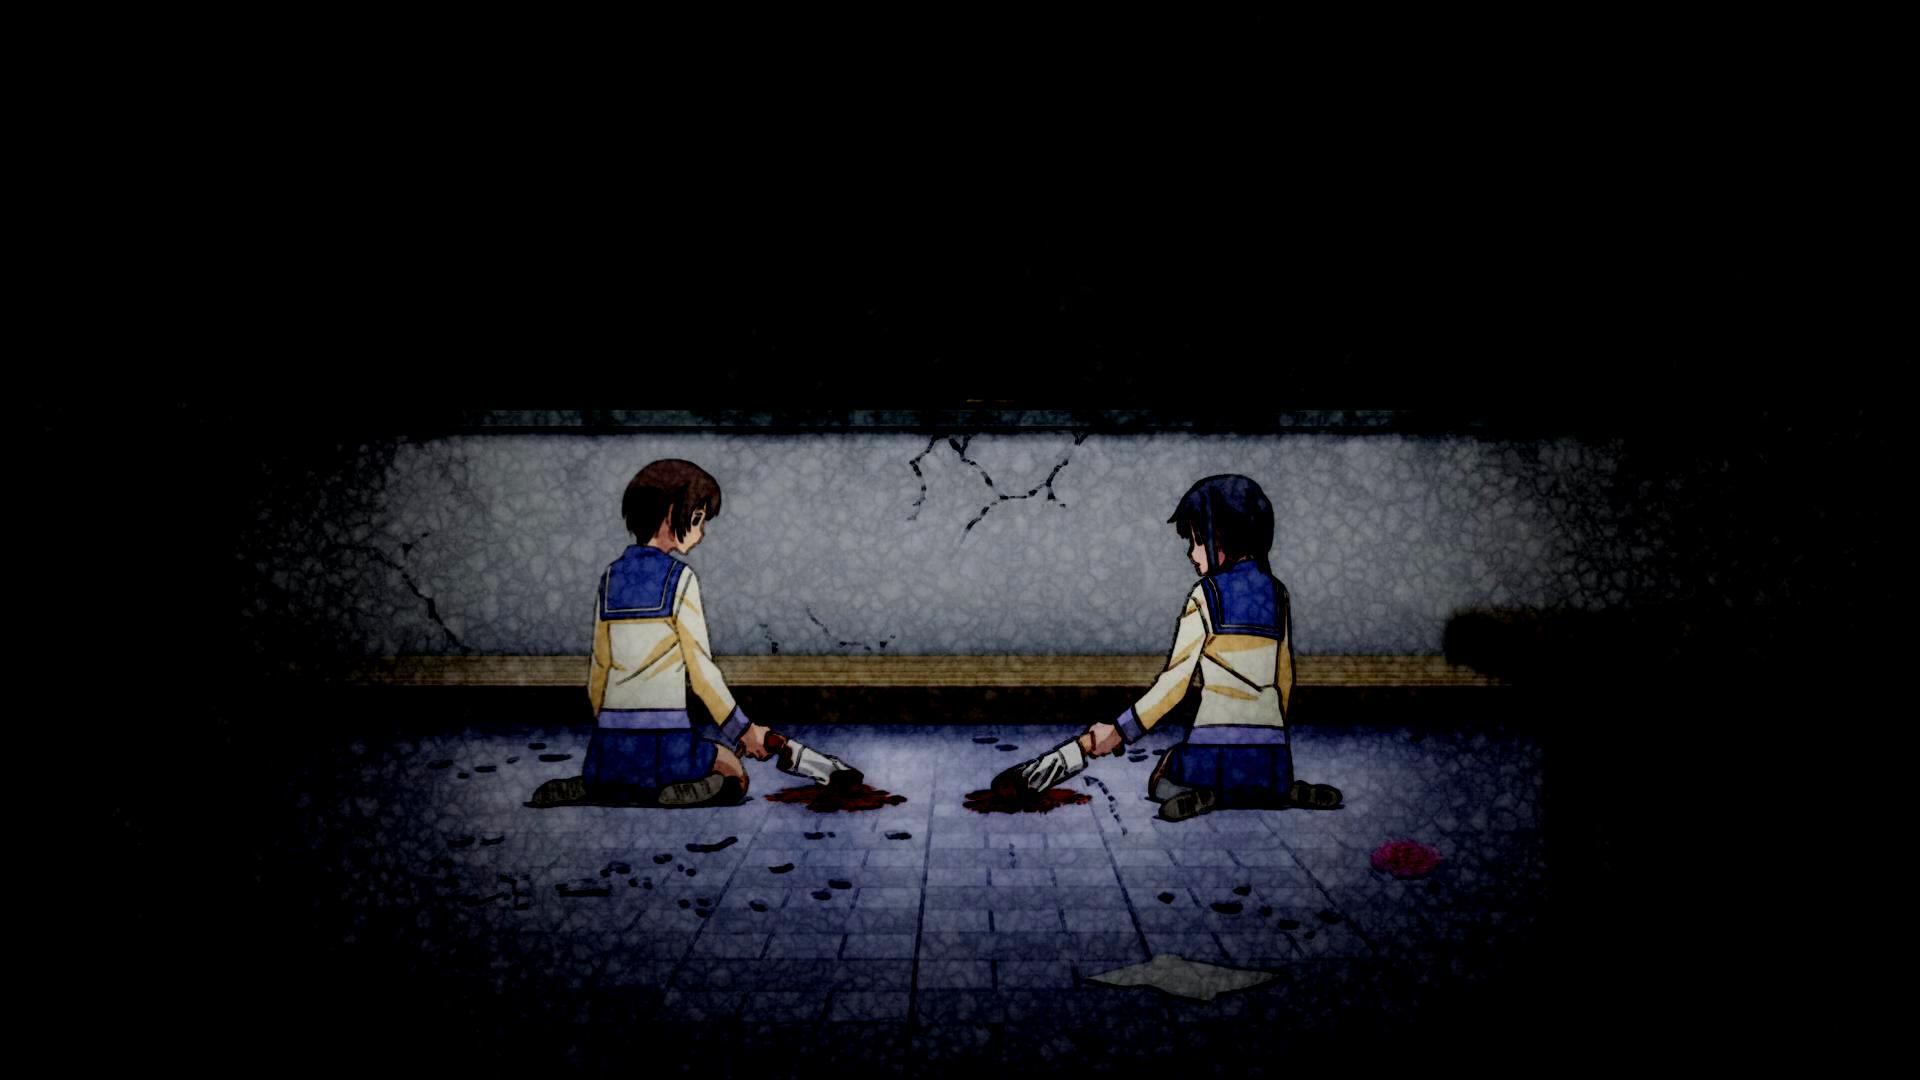 Corpse Party Wallpaper HD Download